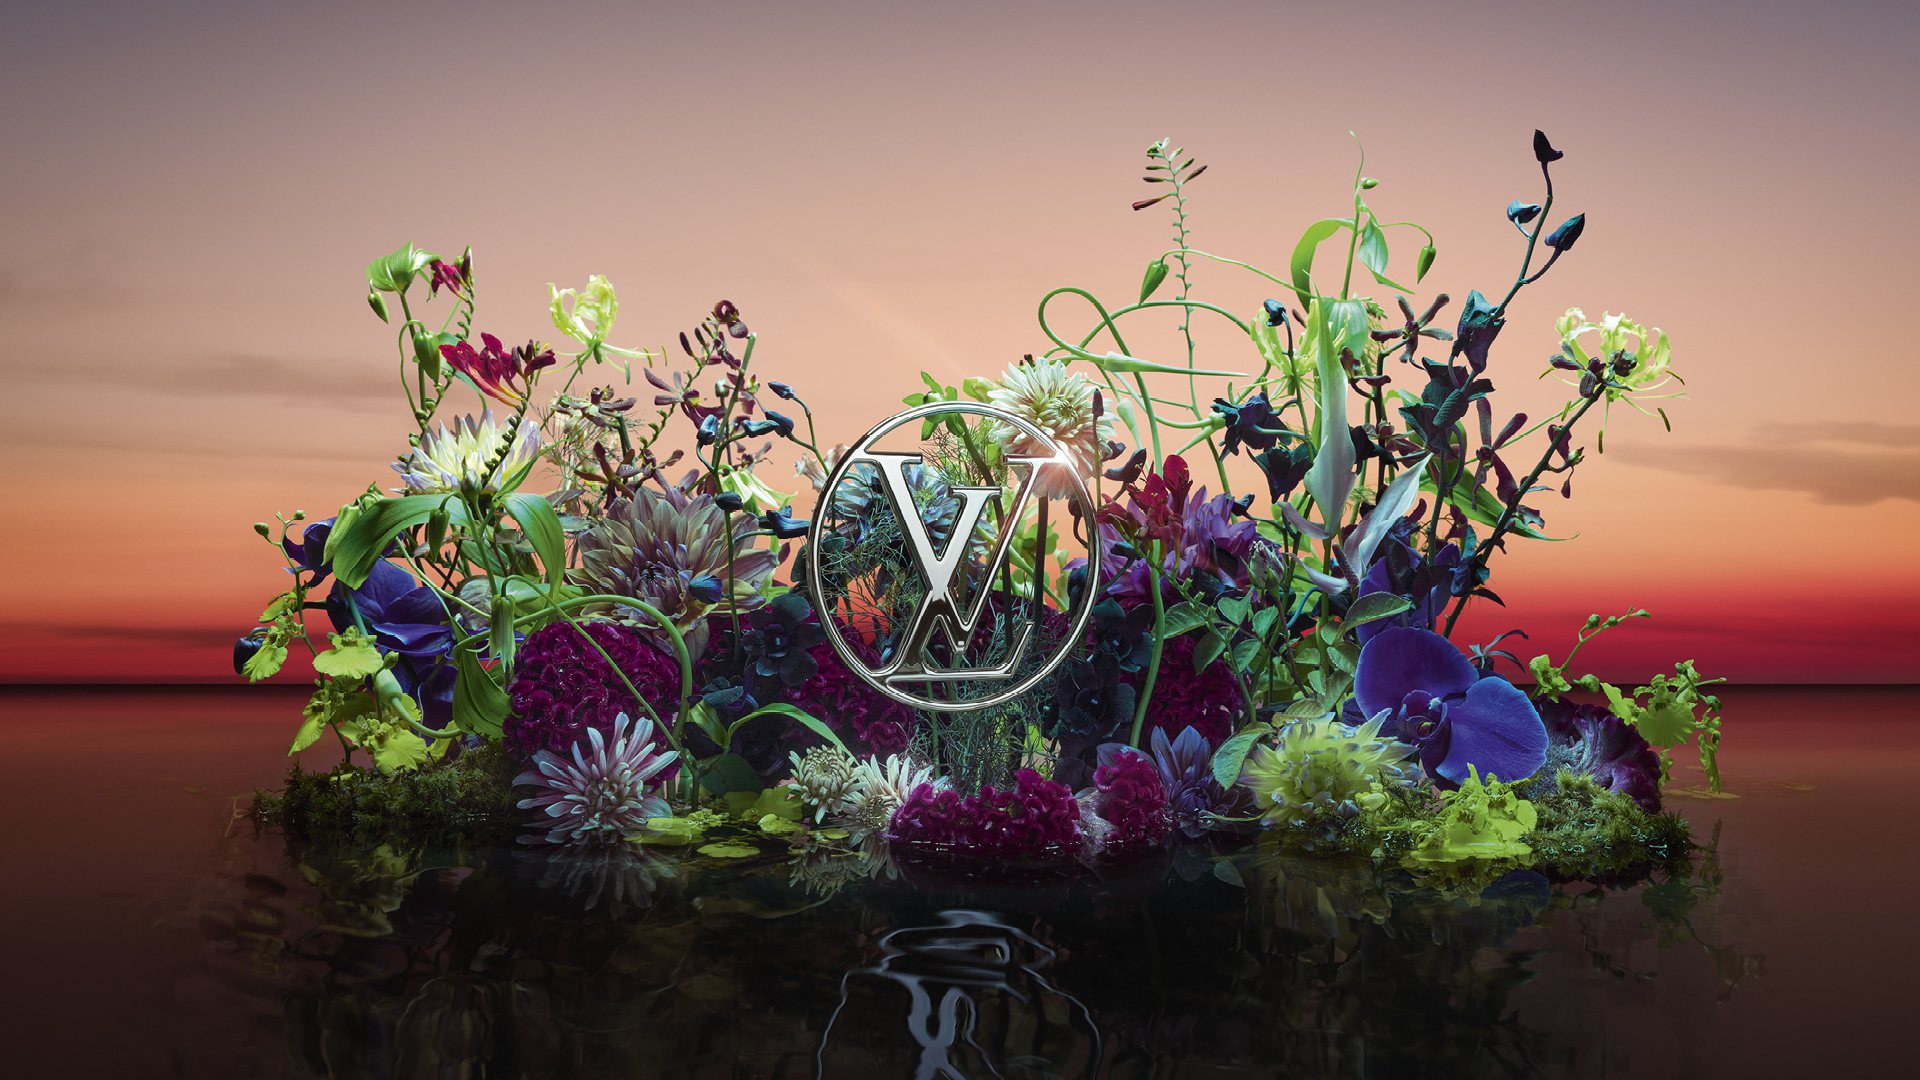 Louis Vuitton Myriad: The Newest Member of The Les Extraits Collection